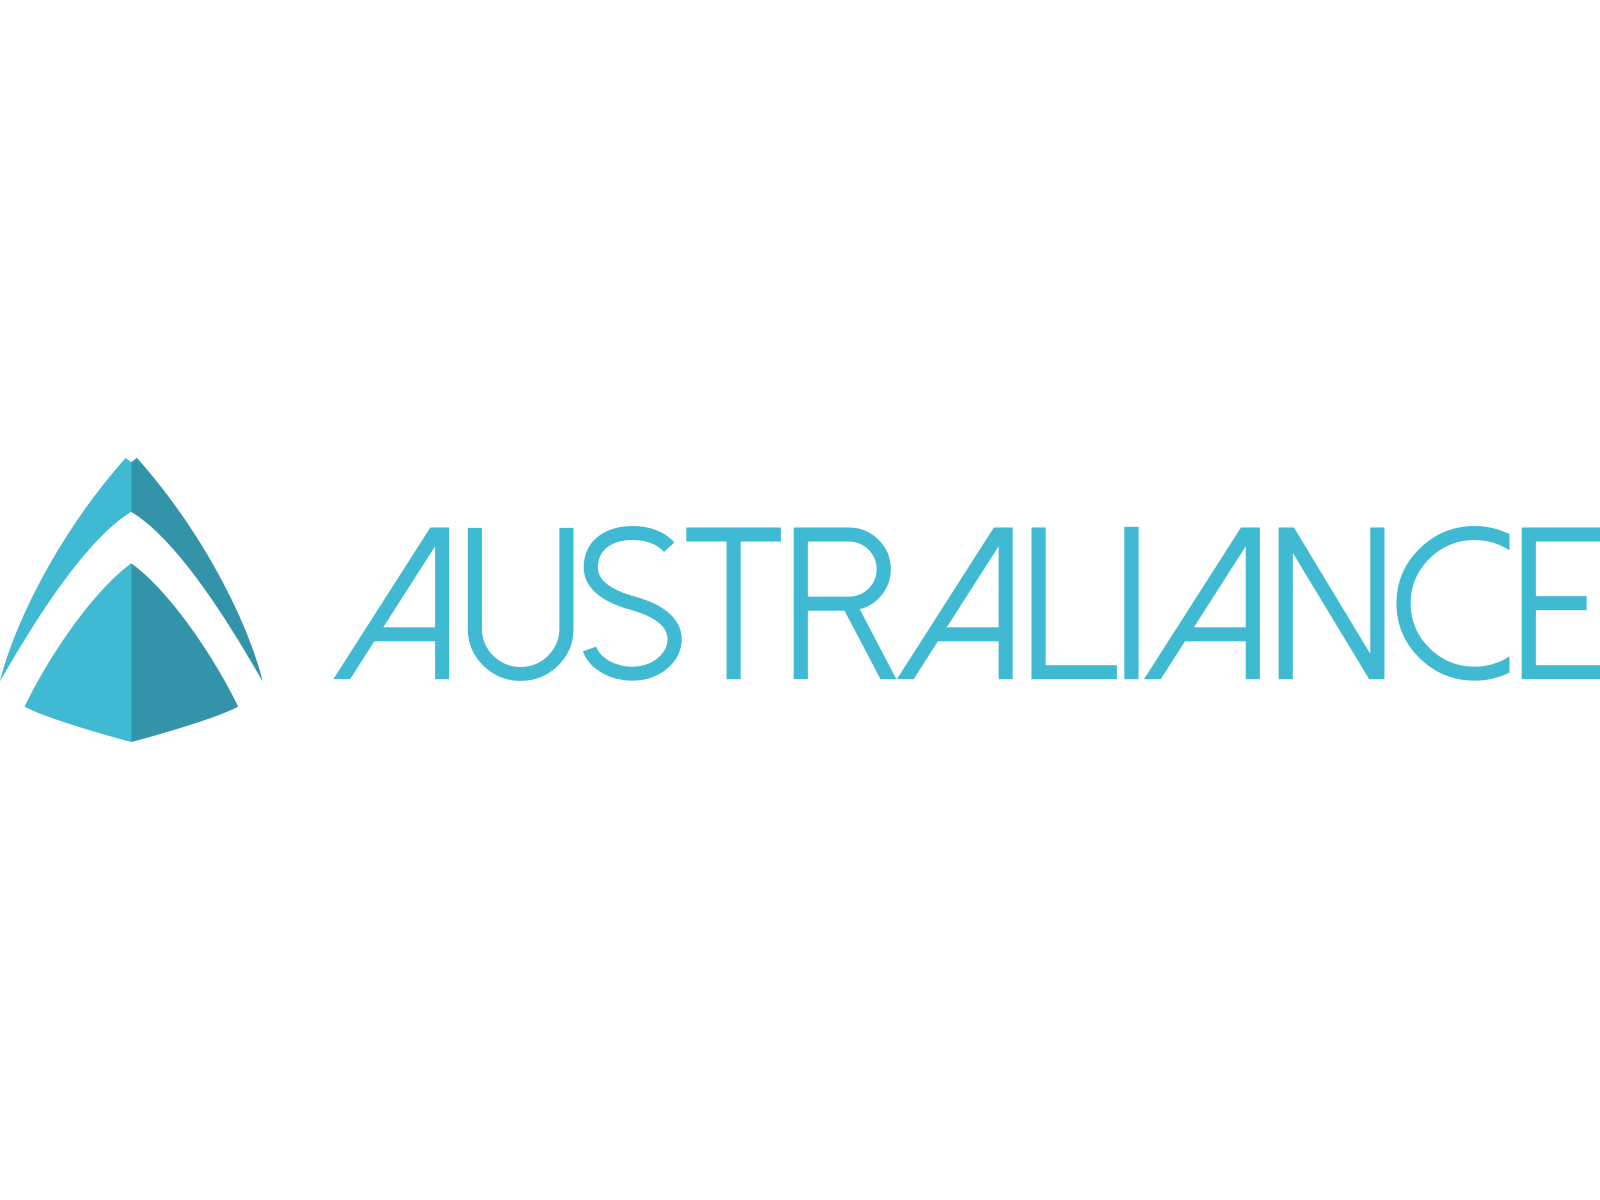 Australiance is the consulting & talent acquisition firm supporting entrepreneurs & professionals succeed in Australia